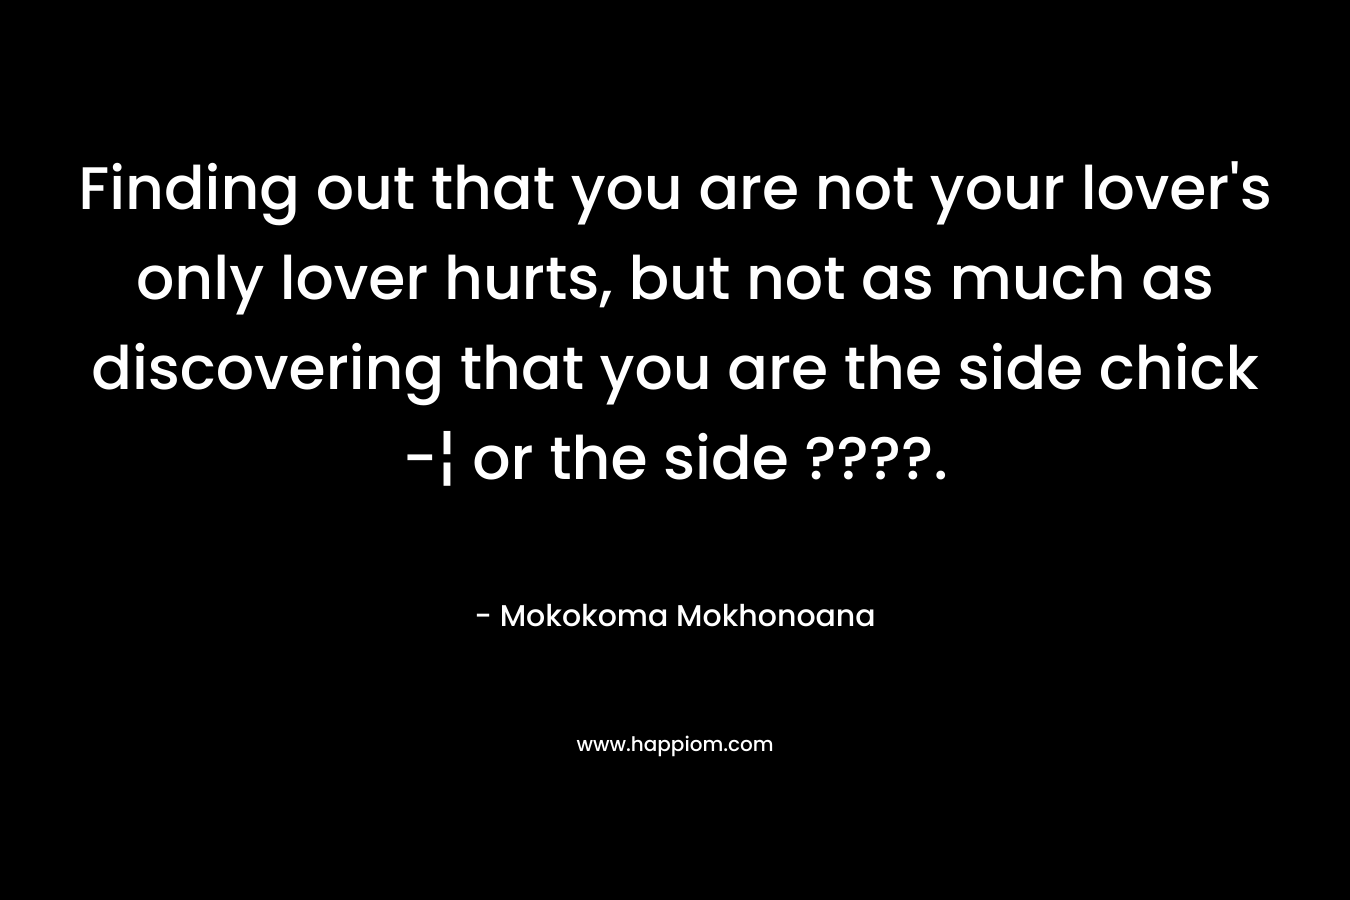 Finding out that you are not your lover's only lover hurts, but not as much as discovering that you are the side chick -¦ or the side ????.